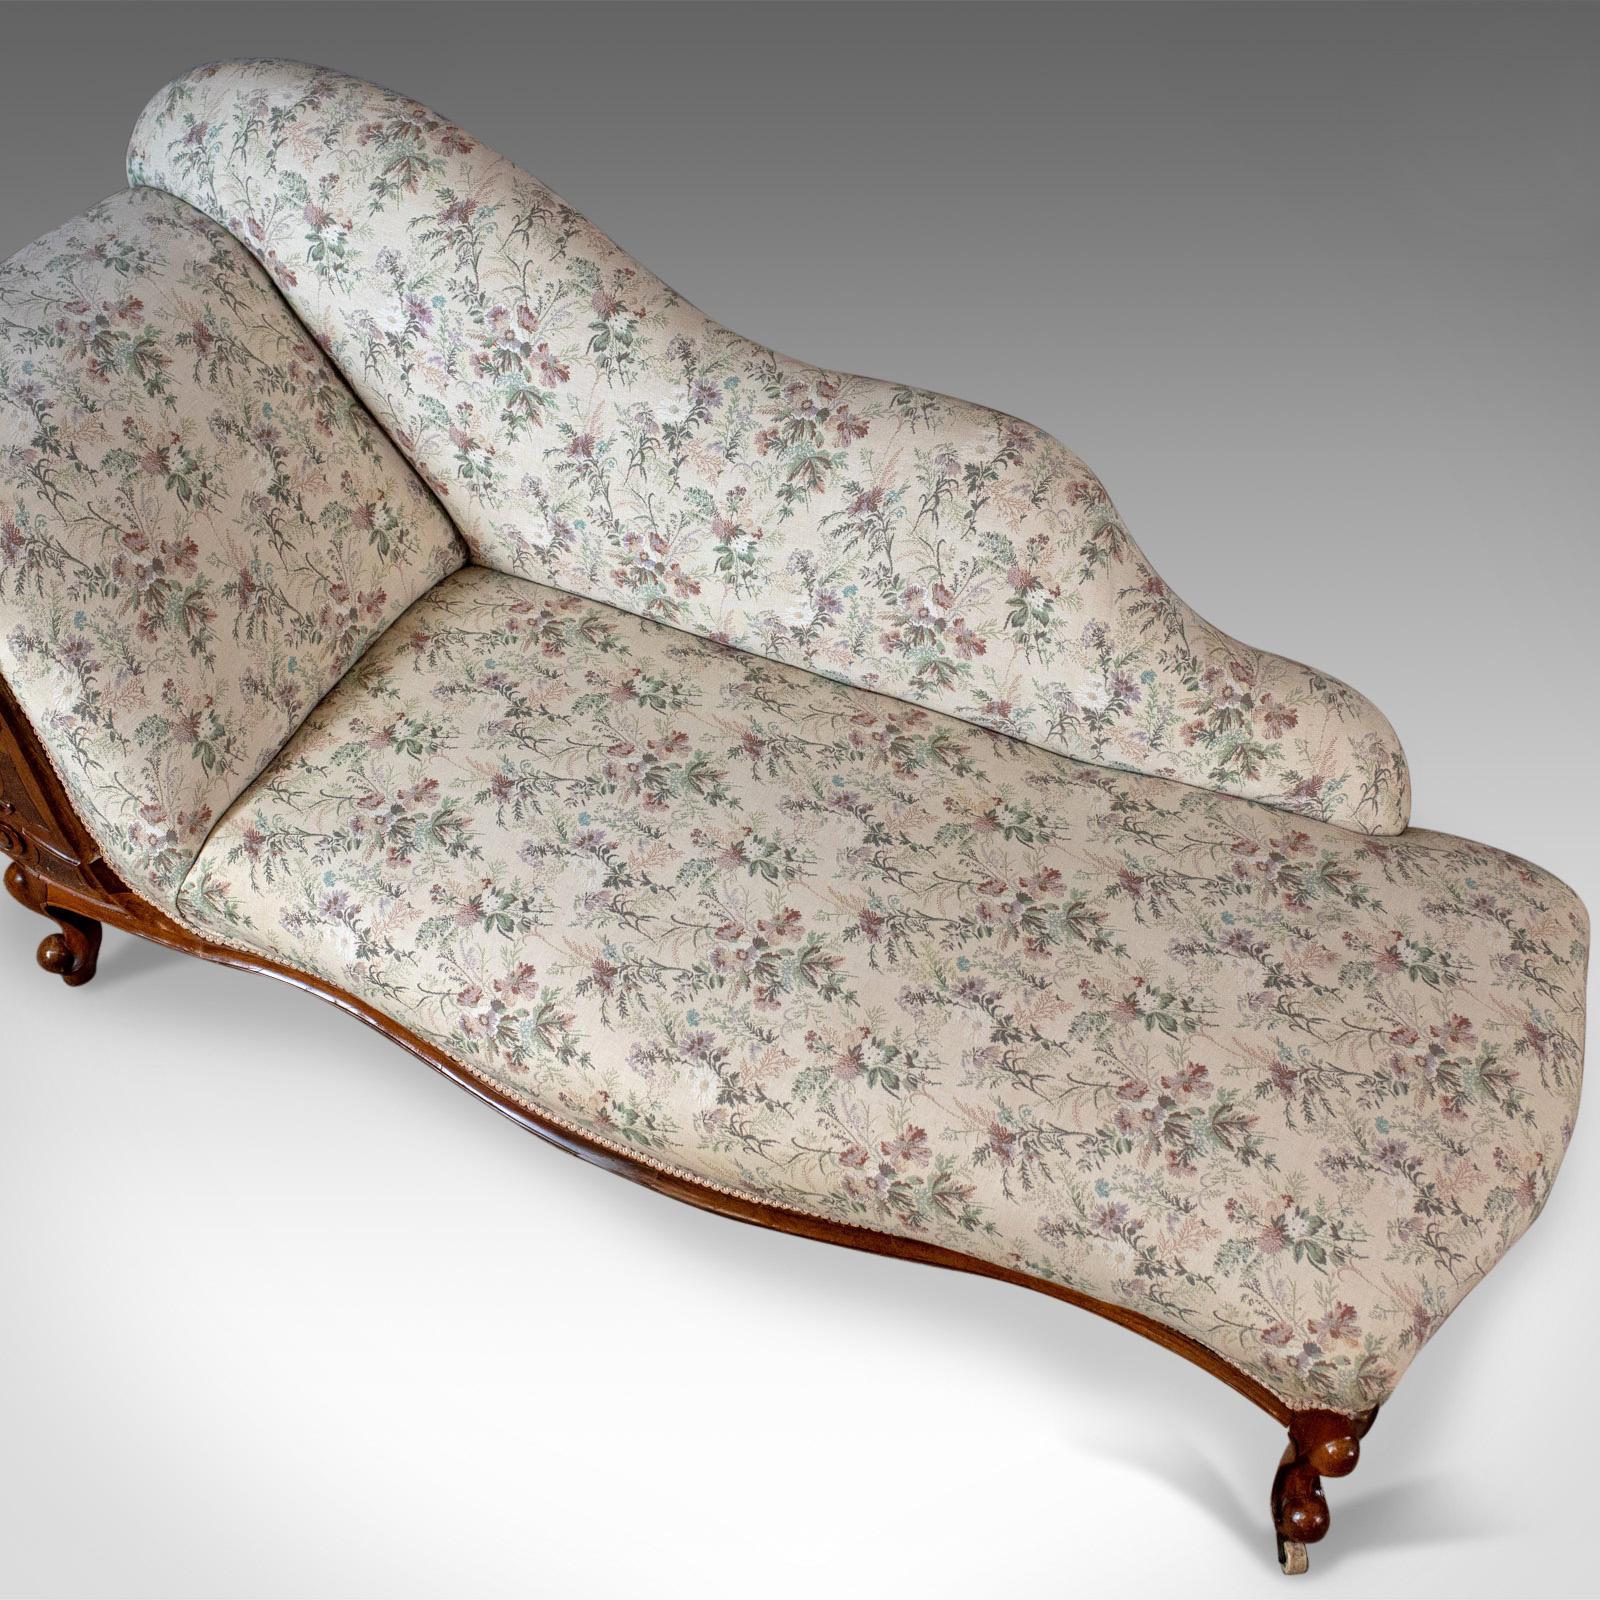 19th Century Antique Chaise Longue, English, Late Regency Day Bed, Walnut, circa 1830